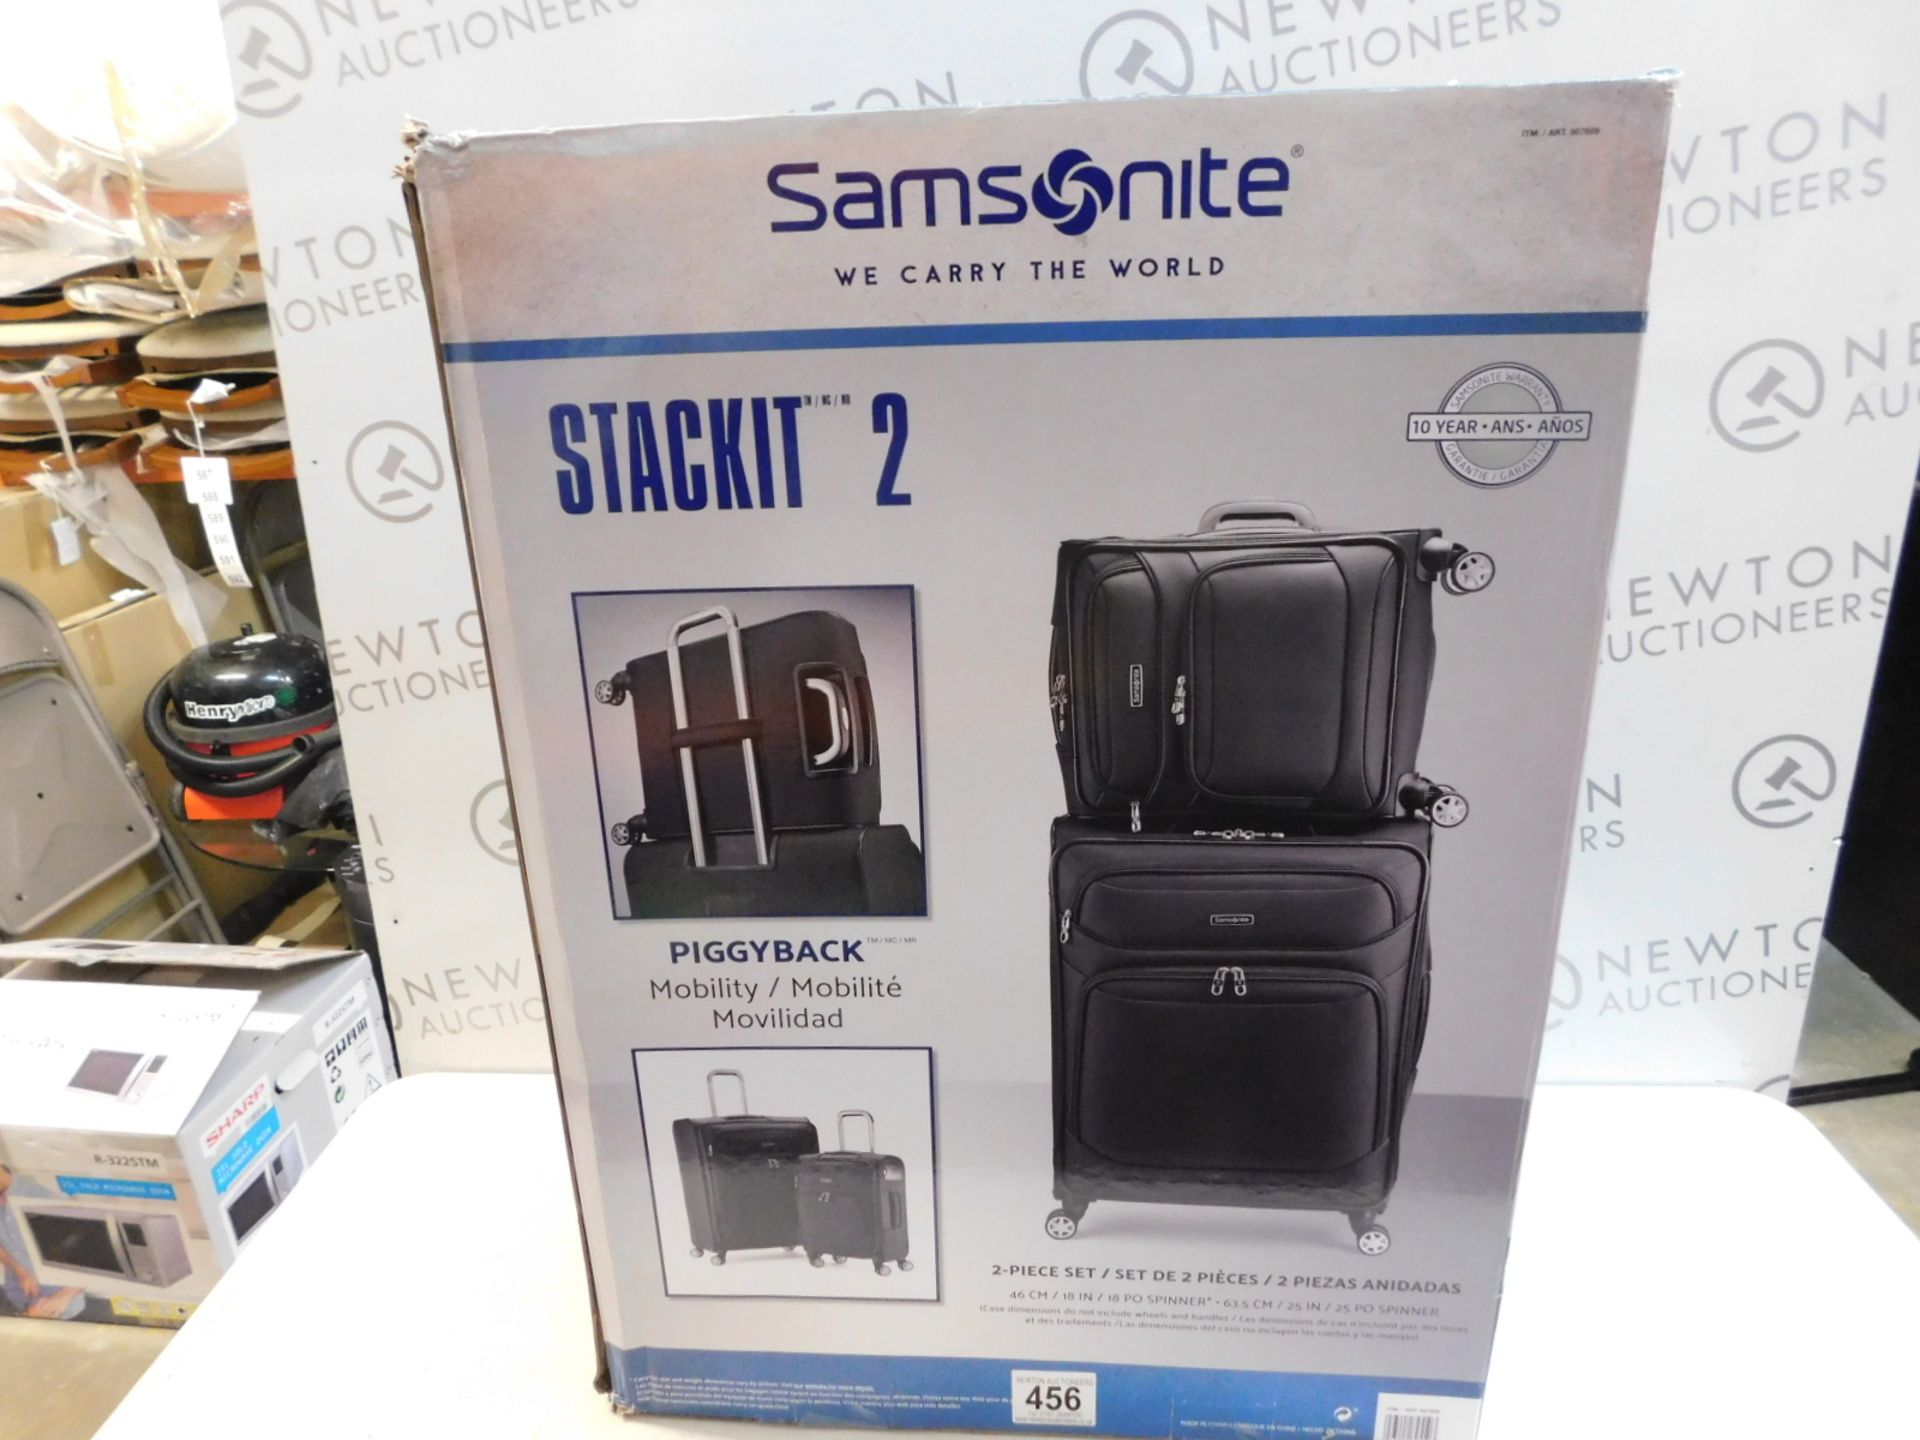 1 BOXED SAMSONITE 2-PIECE STACK IT SOFTSIDE SPINNER LUGGAGE SET RRP £229.99